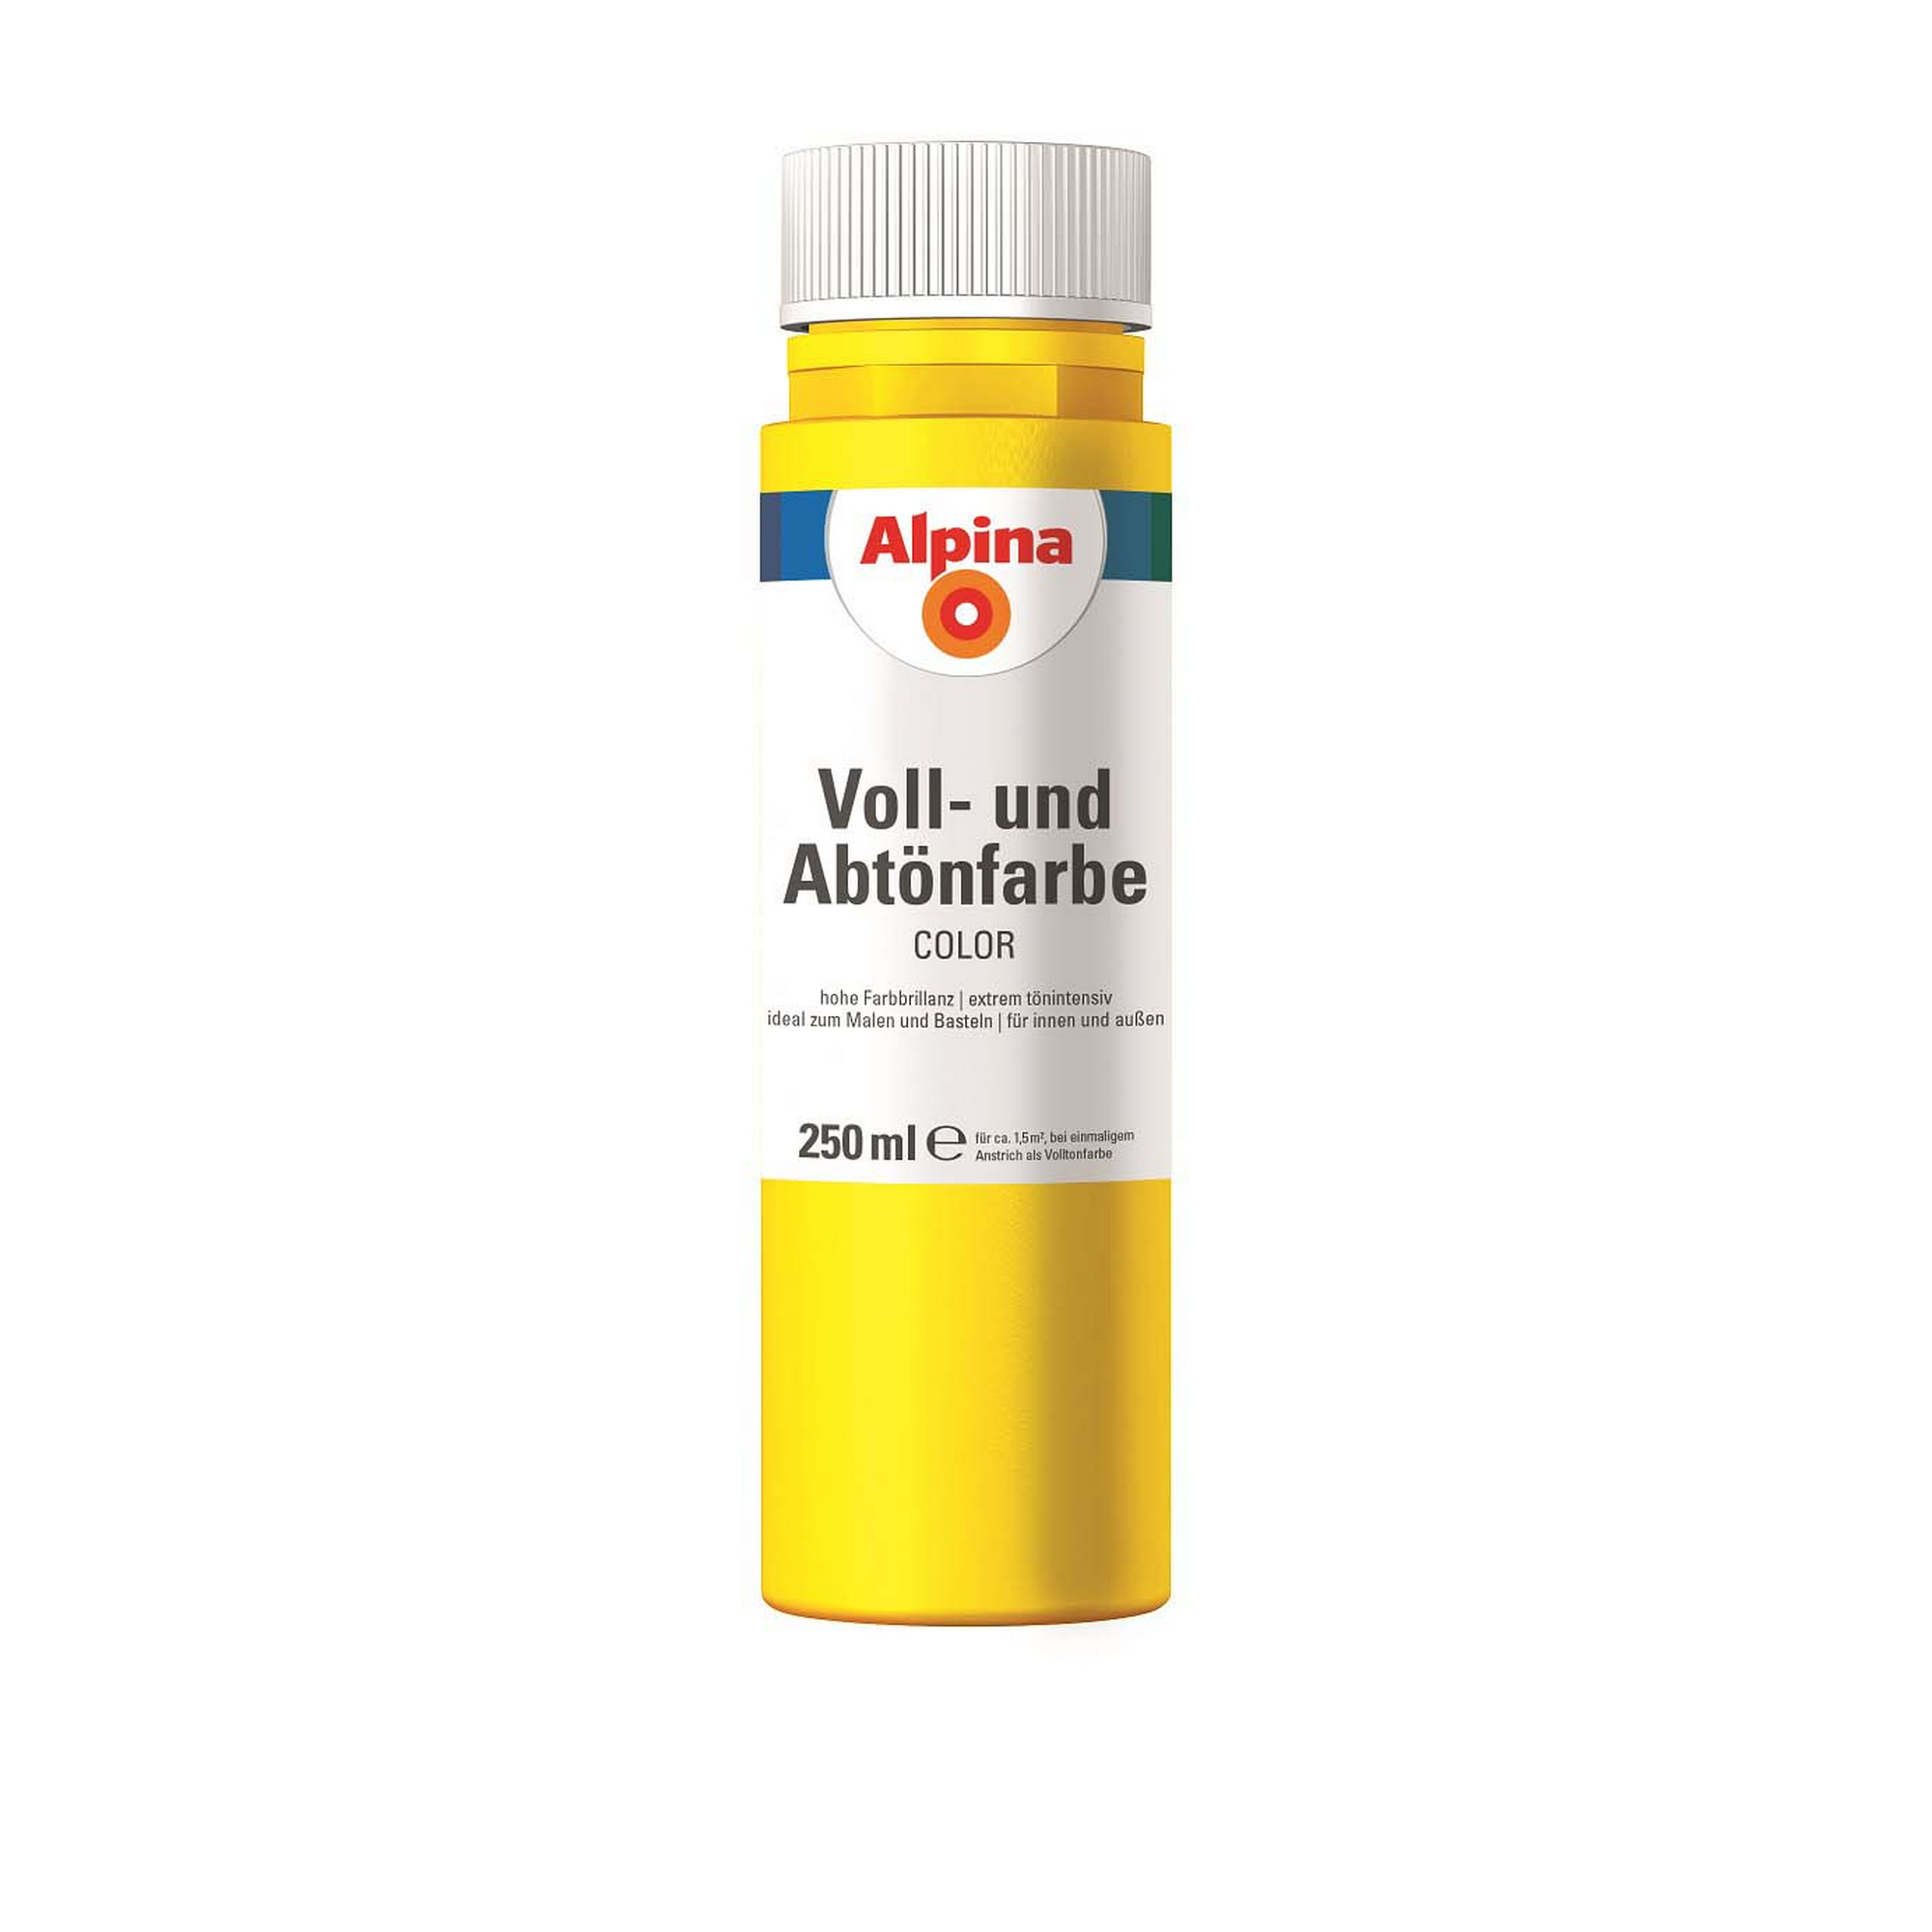 Voll- und Abtönfarbe 'Sunny Yellow' gelb 250 ml + product picture